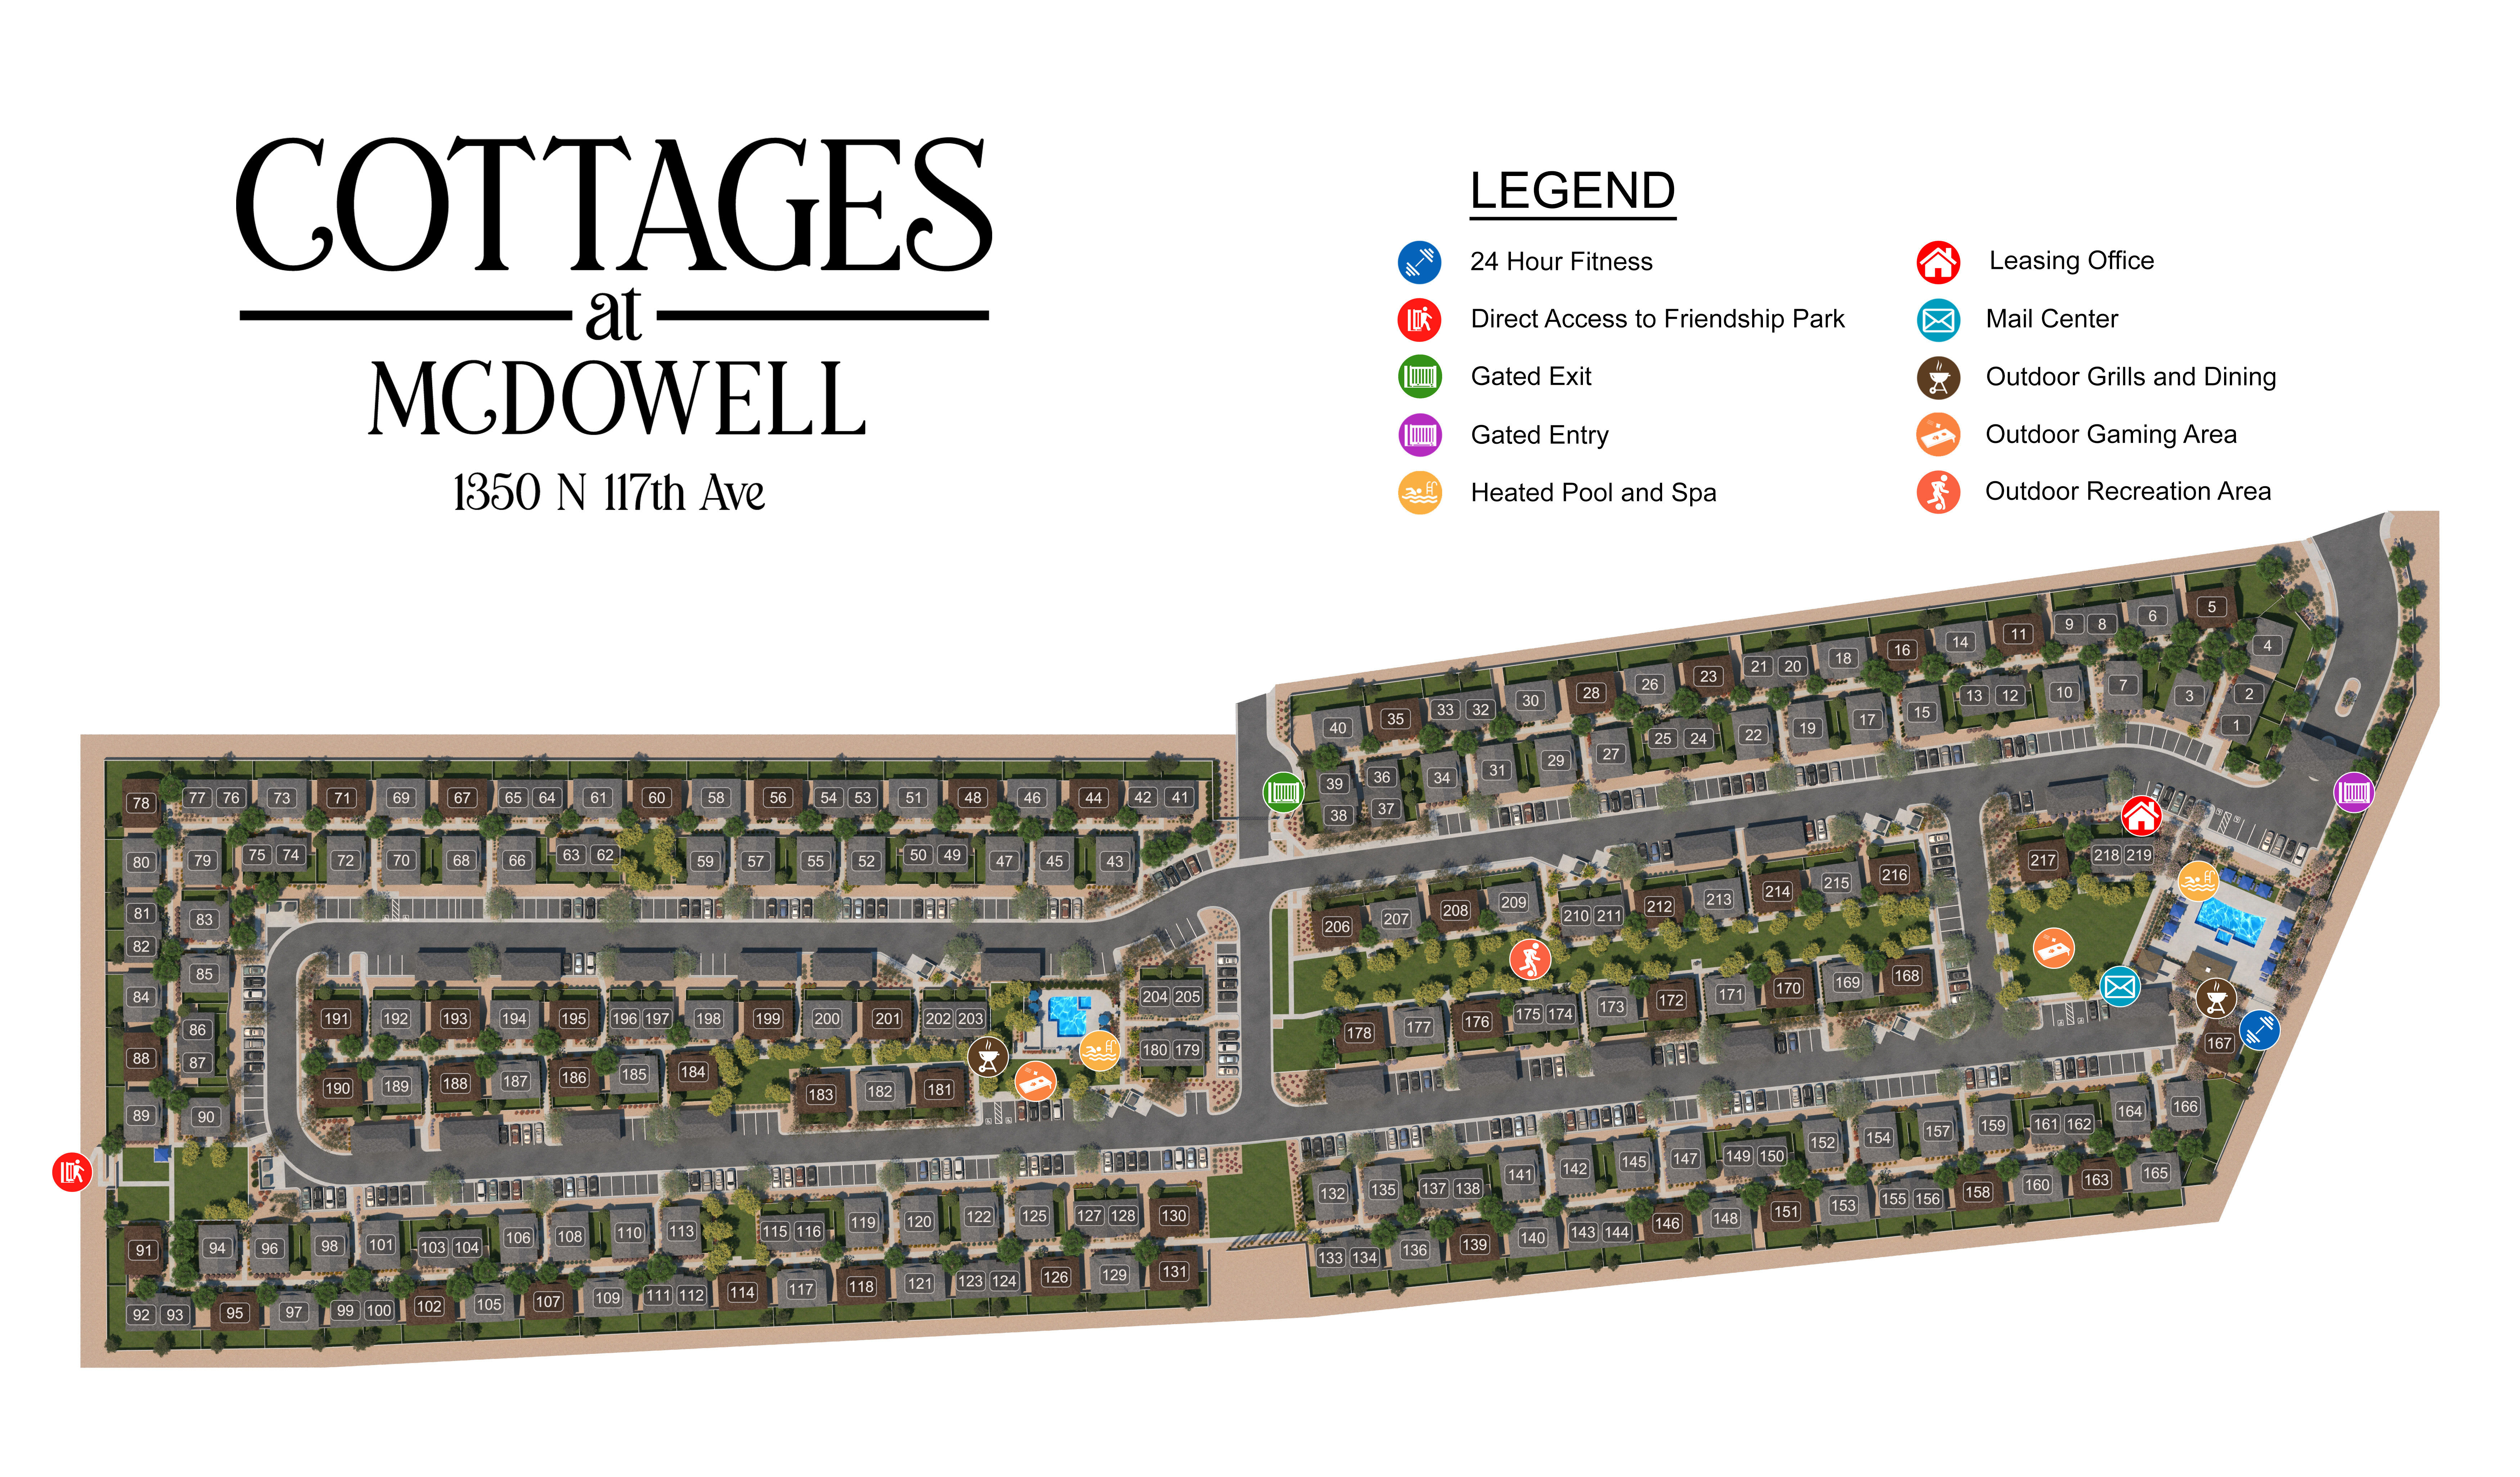 Cottages at McDowell site plan